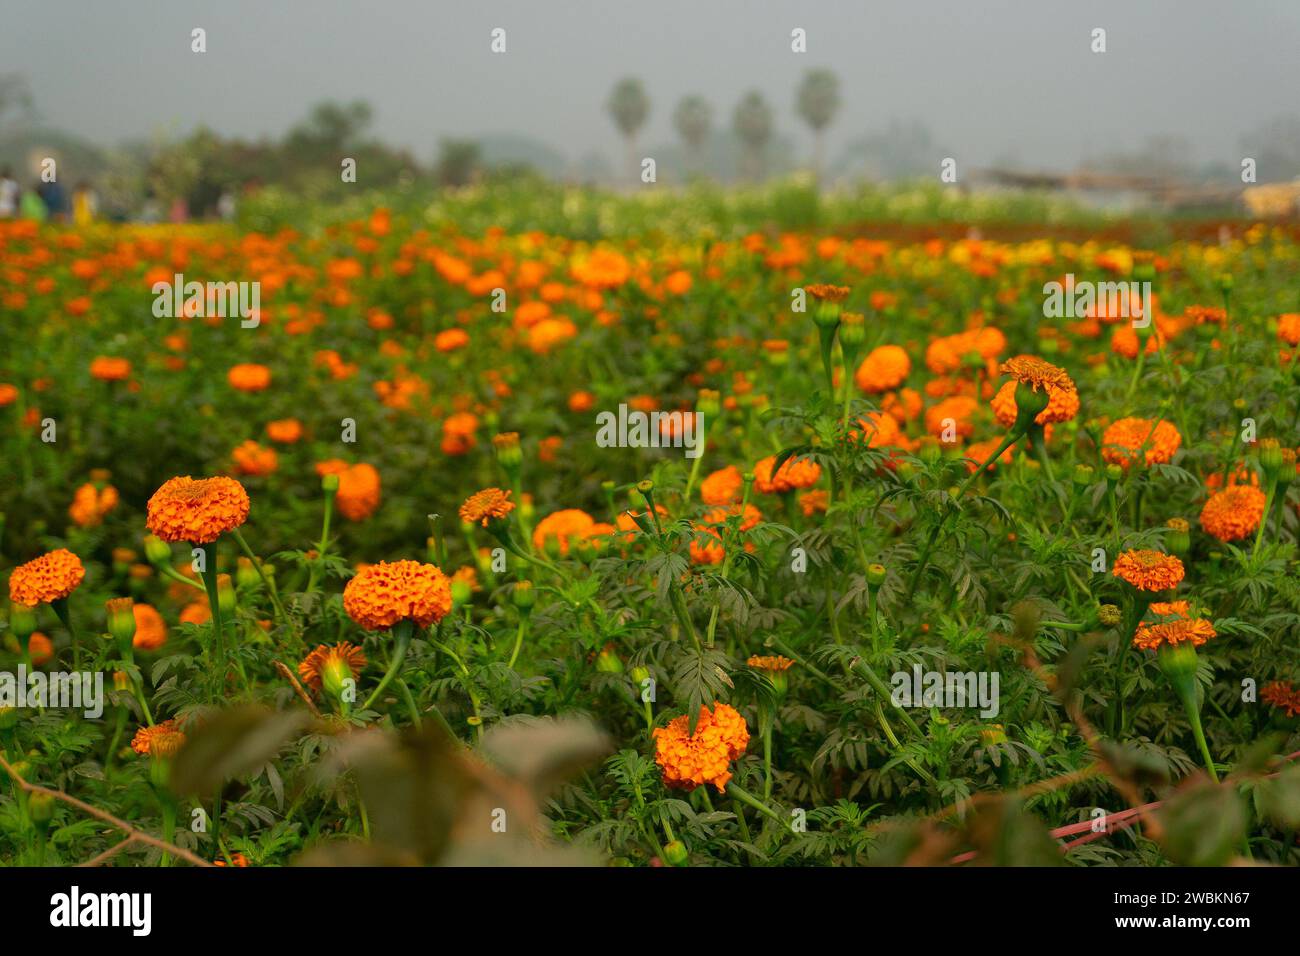 Vast field of orange marigold flowers at valley of flowers, Khirai, West Bengal, India. Flowers are harvested here for sale. Tagetes, herbaceous plant Stock Photo